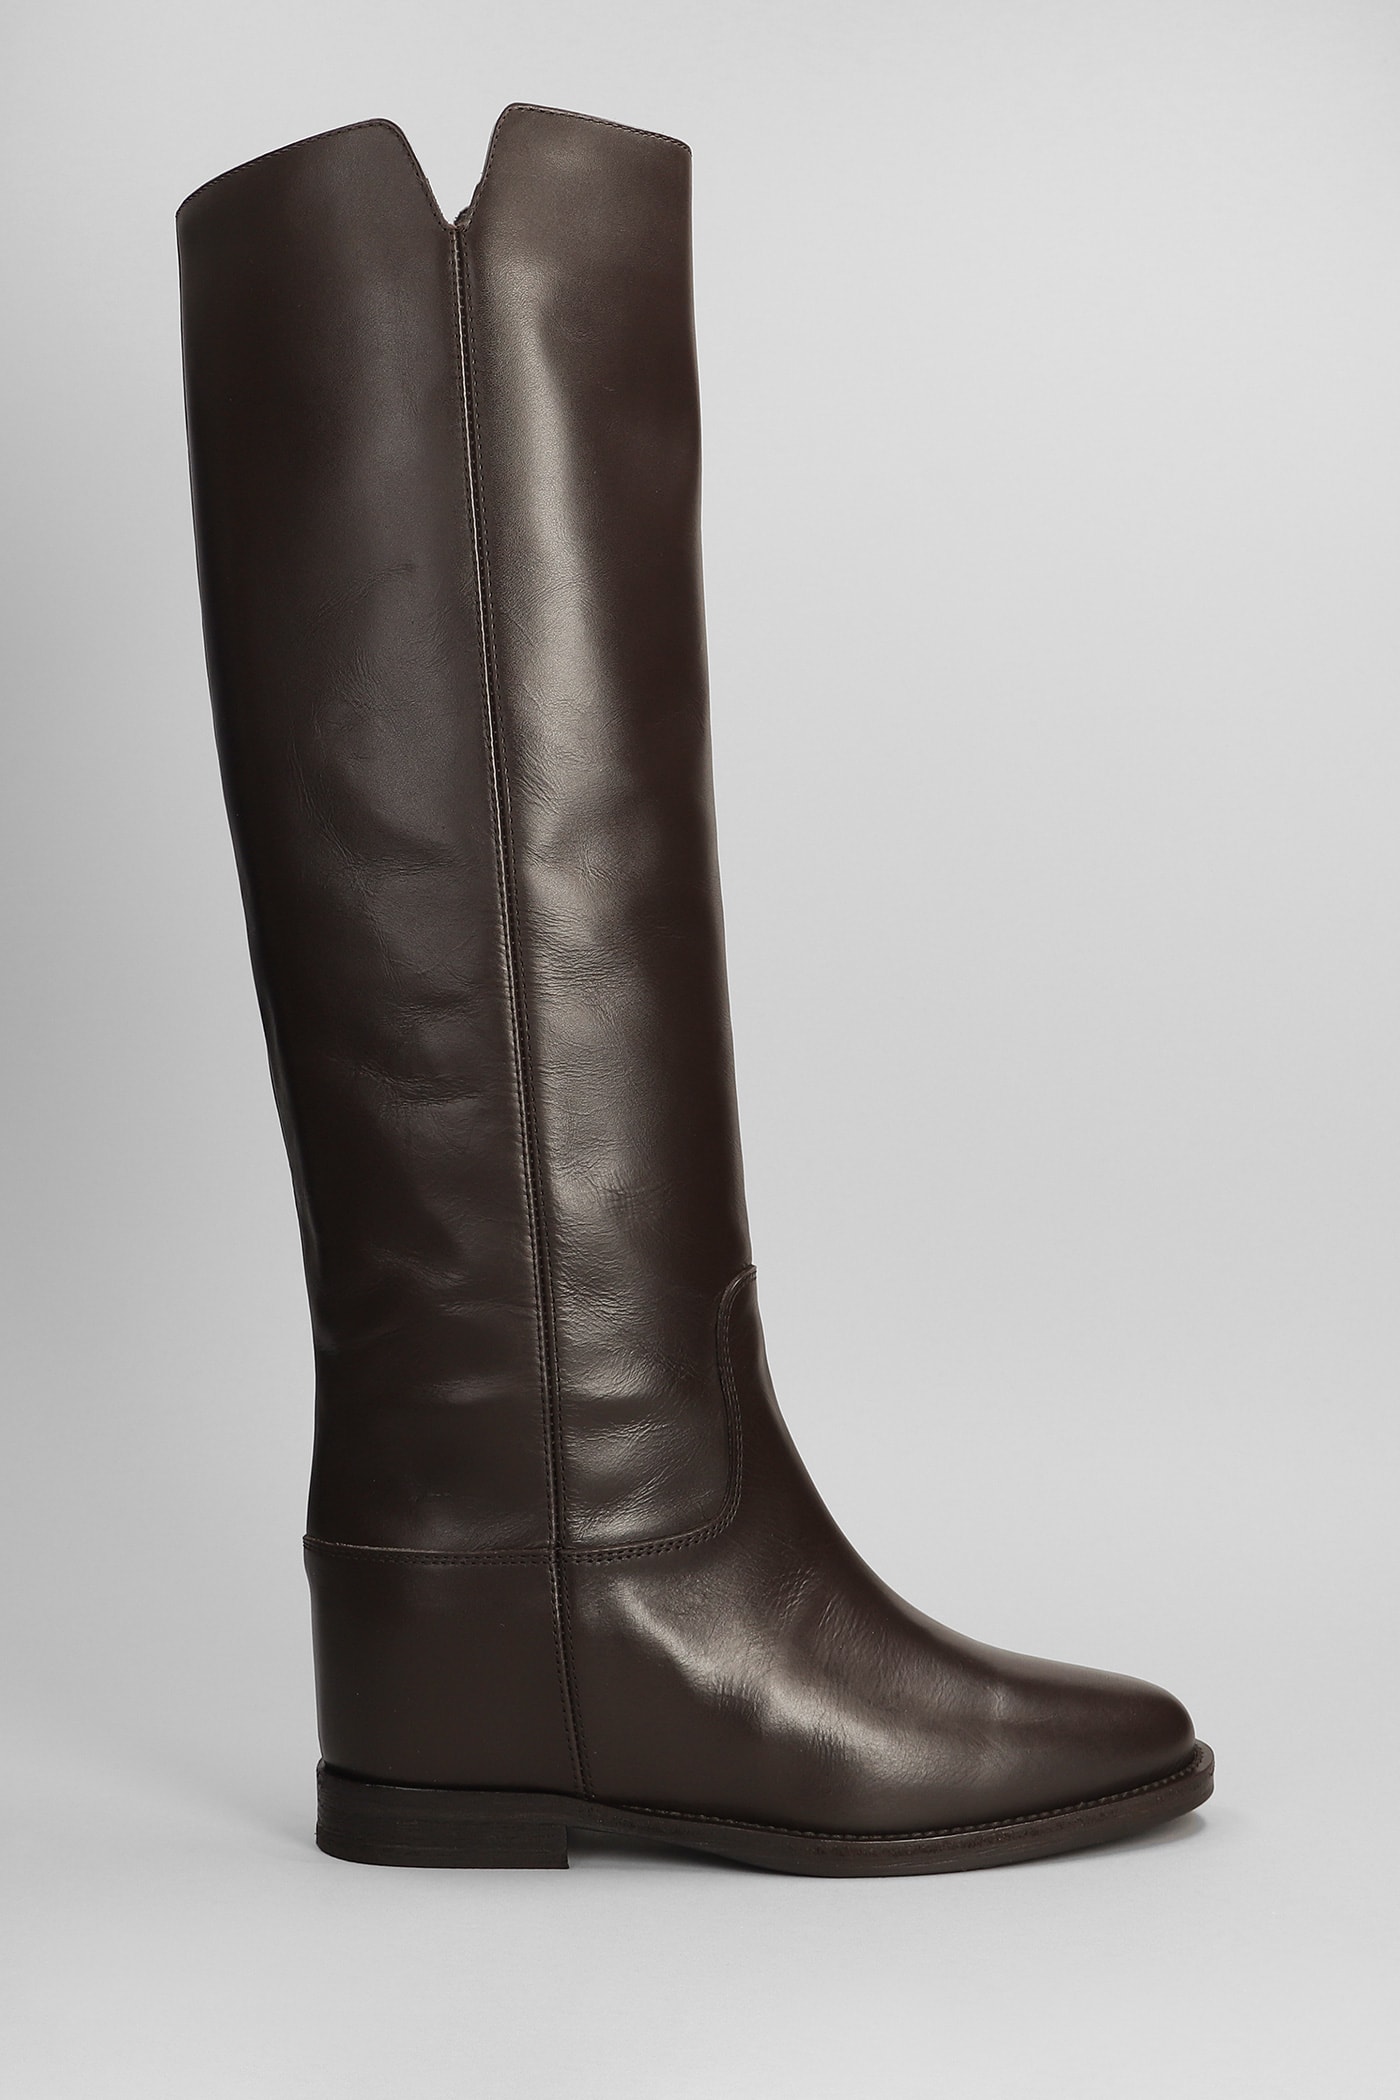 In Dark Brown Leather